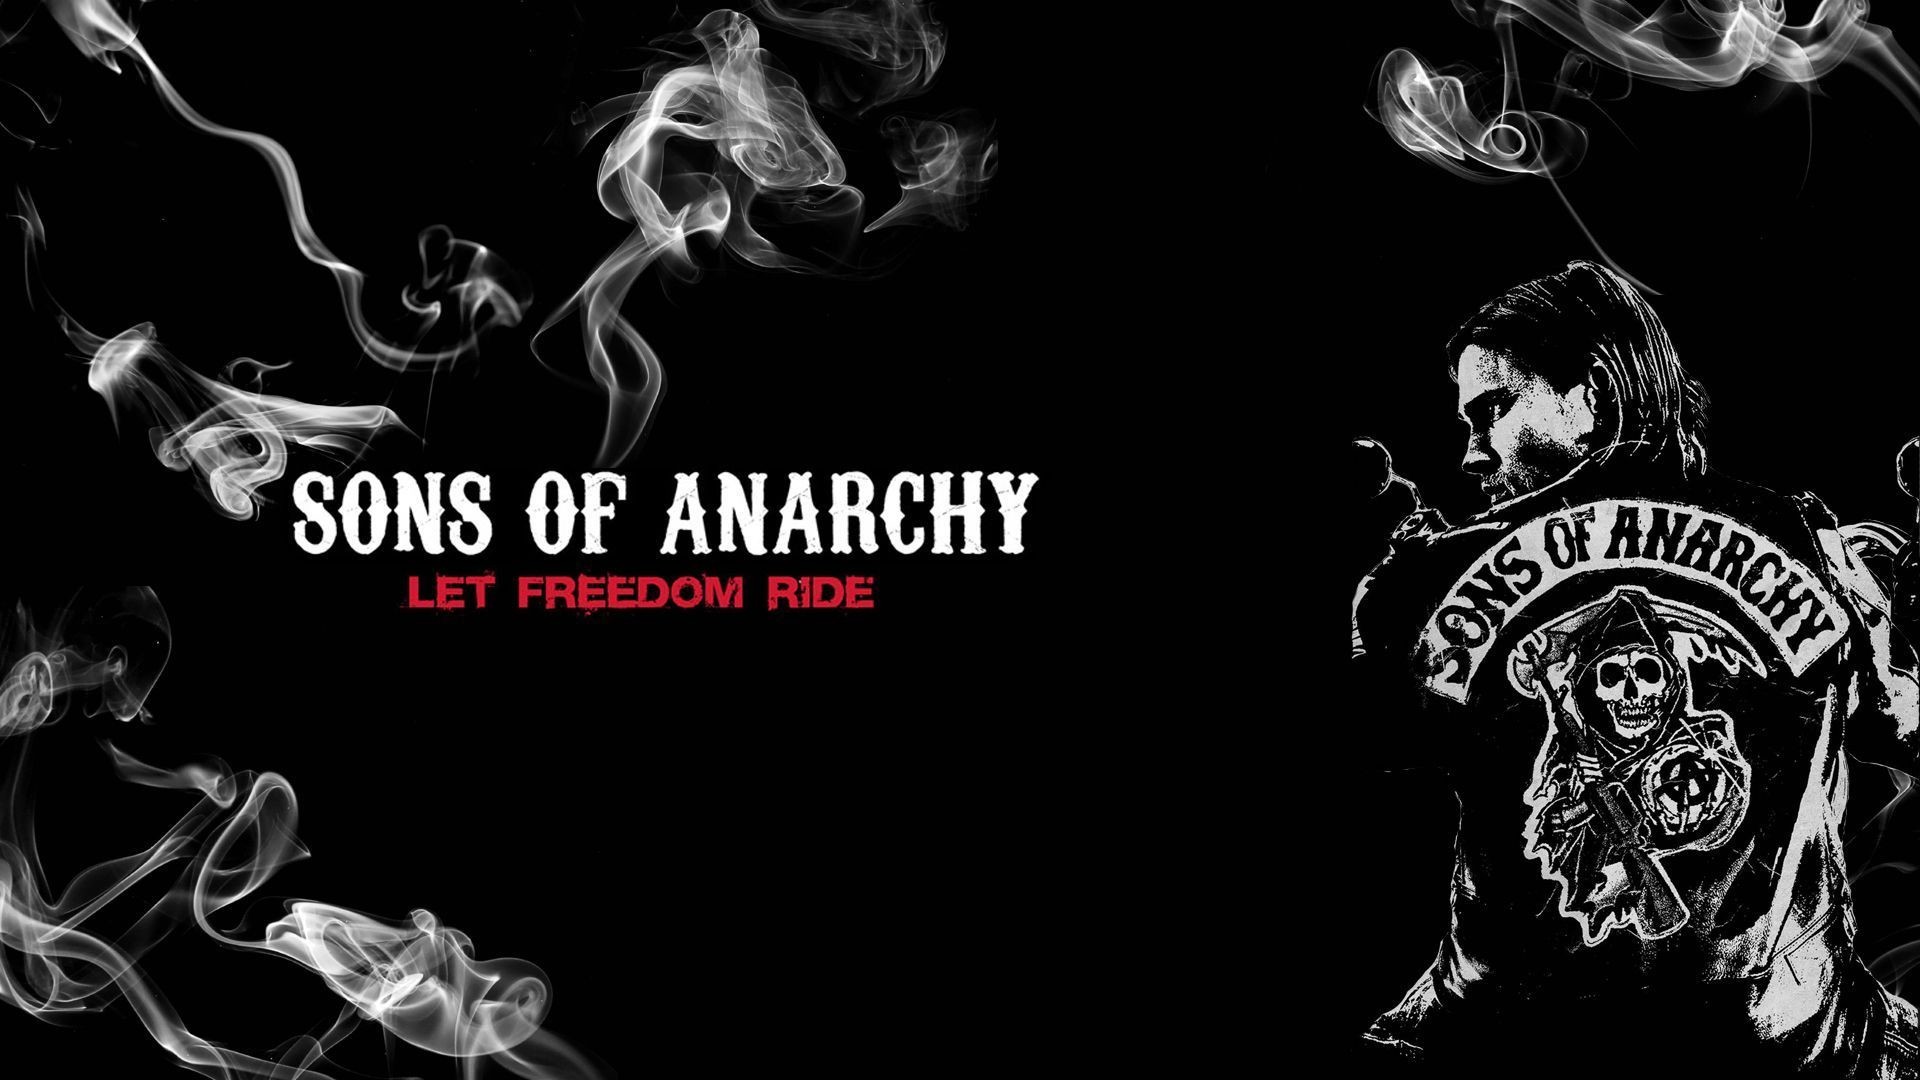 1920x1080 Sons Of Anarchy - Sons Of Anarchy Wallpaper (19815280) - Fanpop